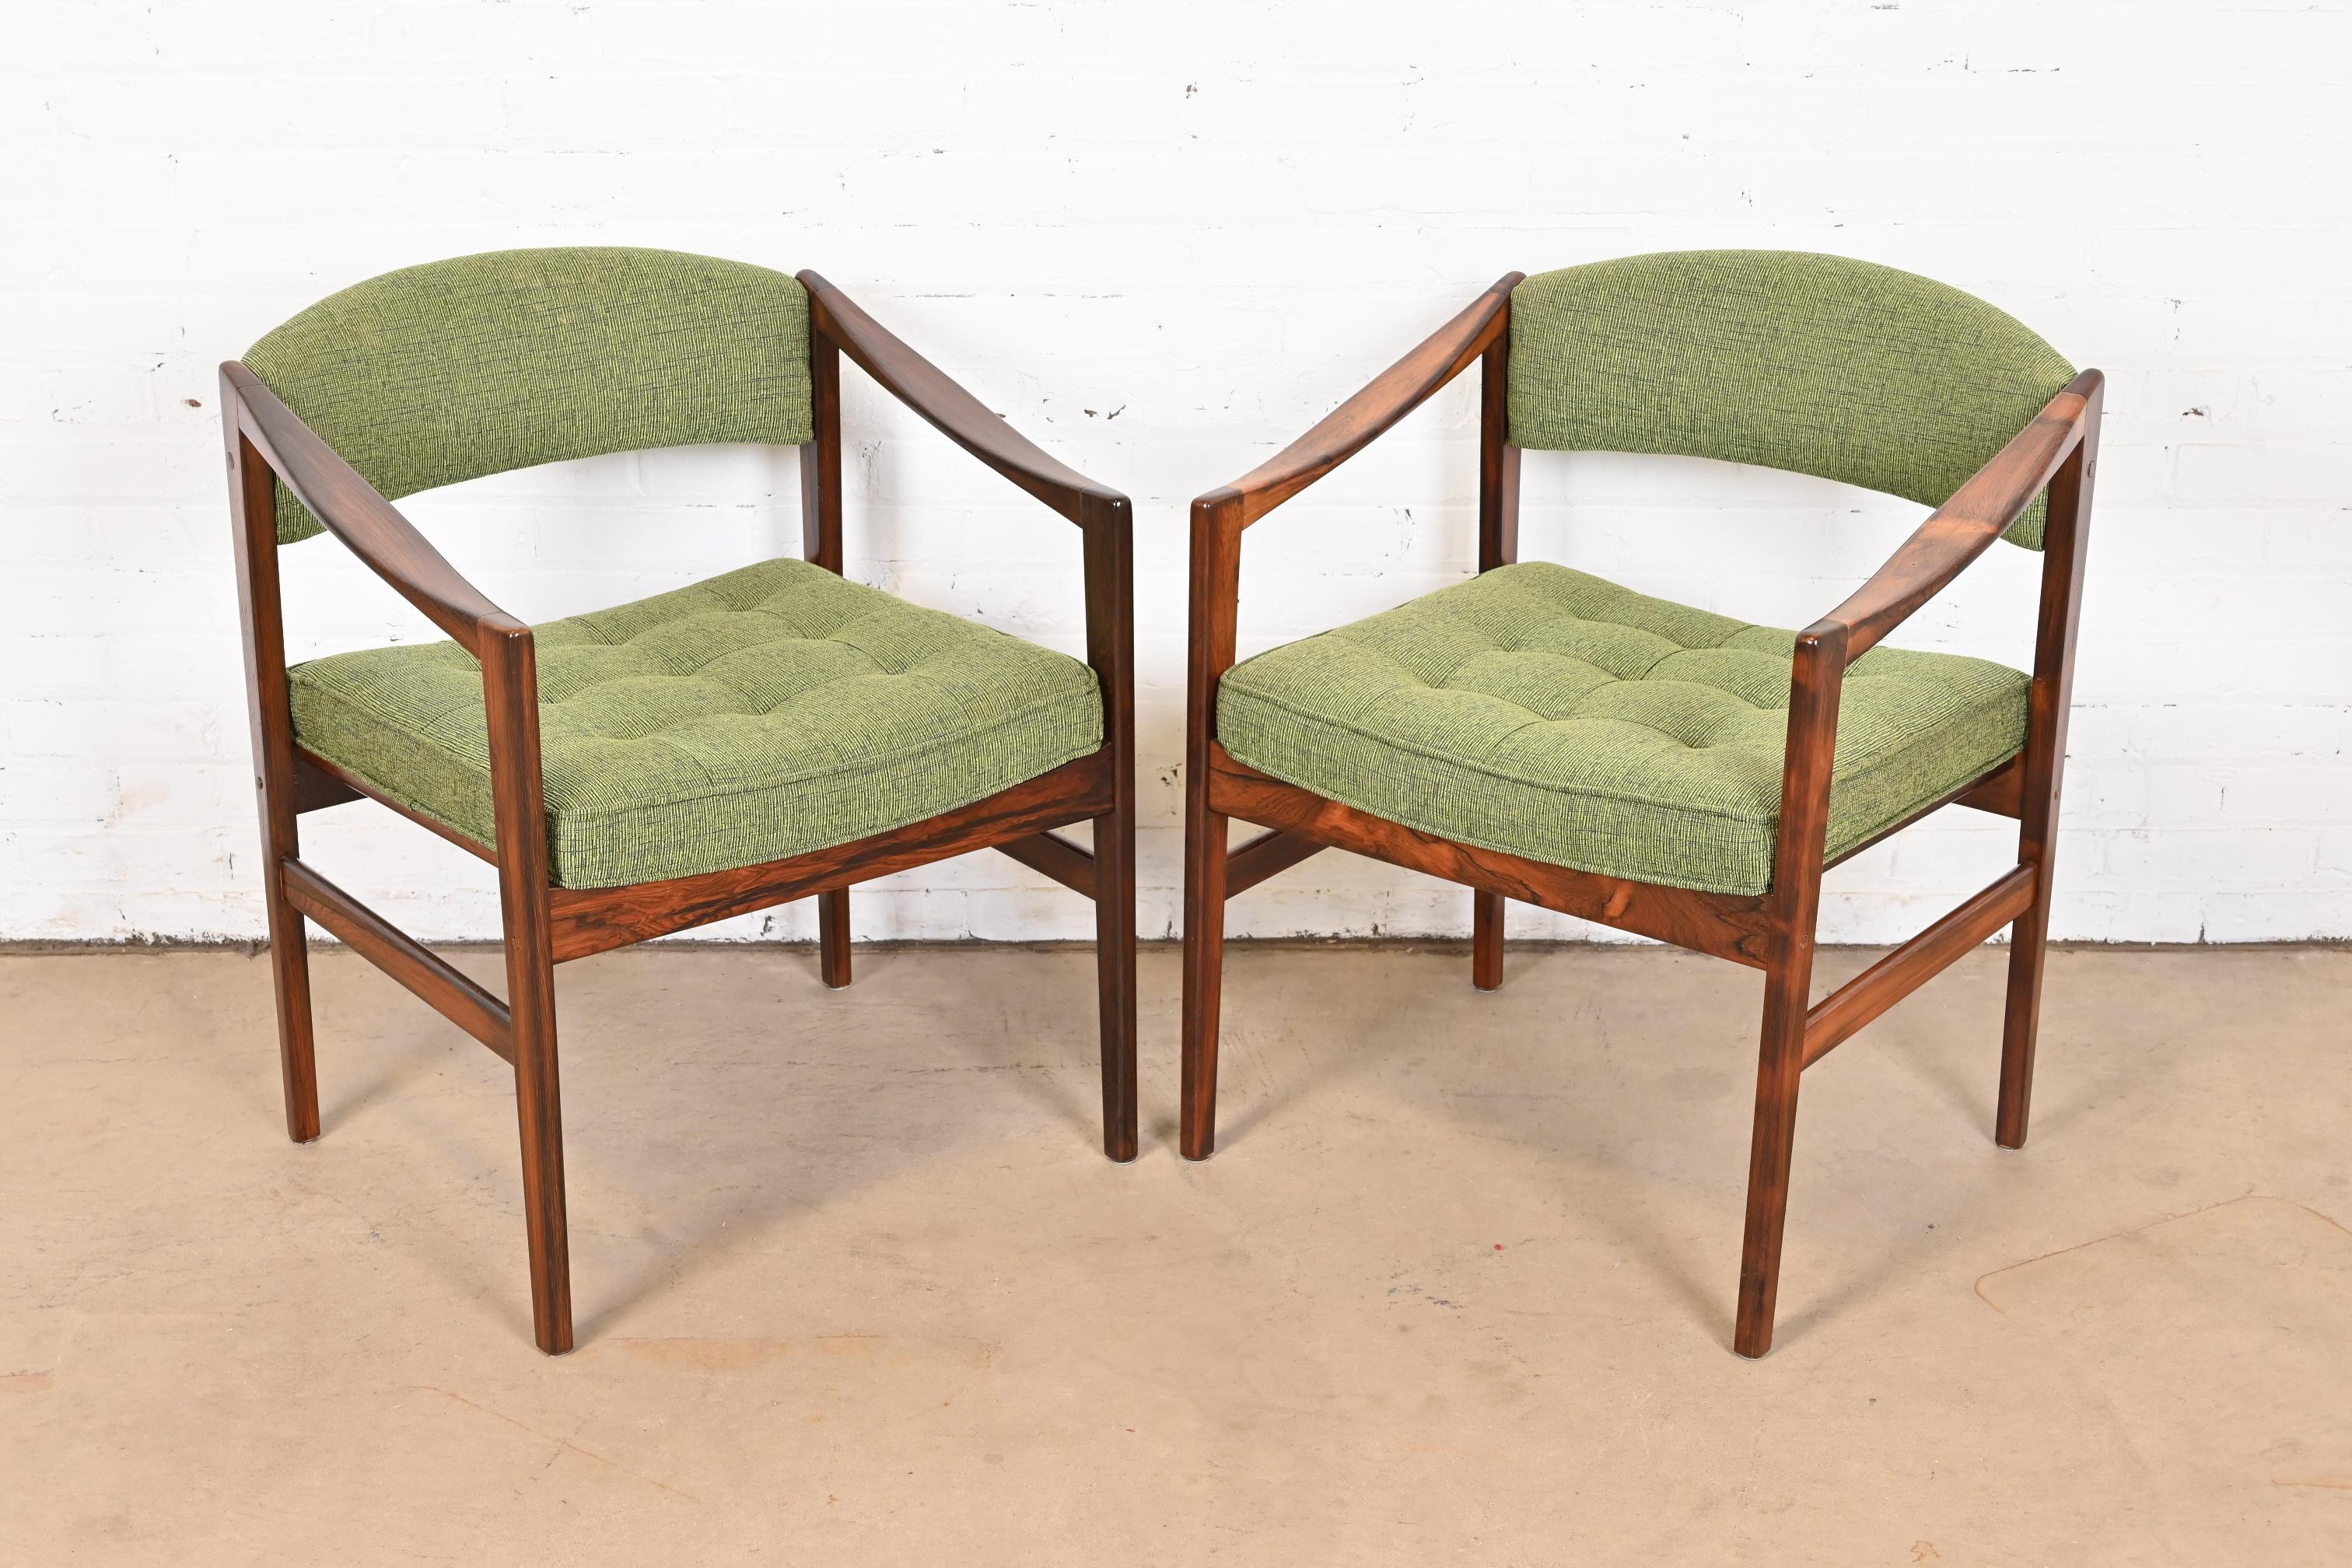 An outstanding pair of Swedish Modern armchairs, club chairs, or lounge chairs

By Ray Zimmerman for DUX

Sweden, 1960s

Stunning sculpted Brazilian rosewood frames, with green Knoll upholstery on seats and backs.

Measures: 24.75